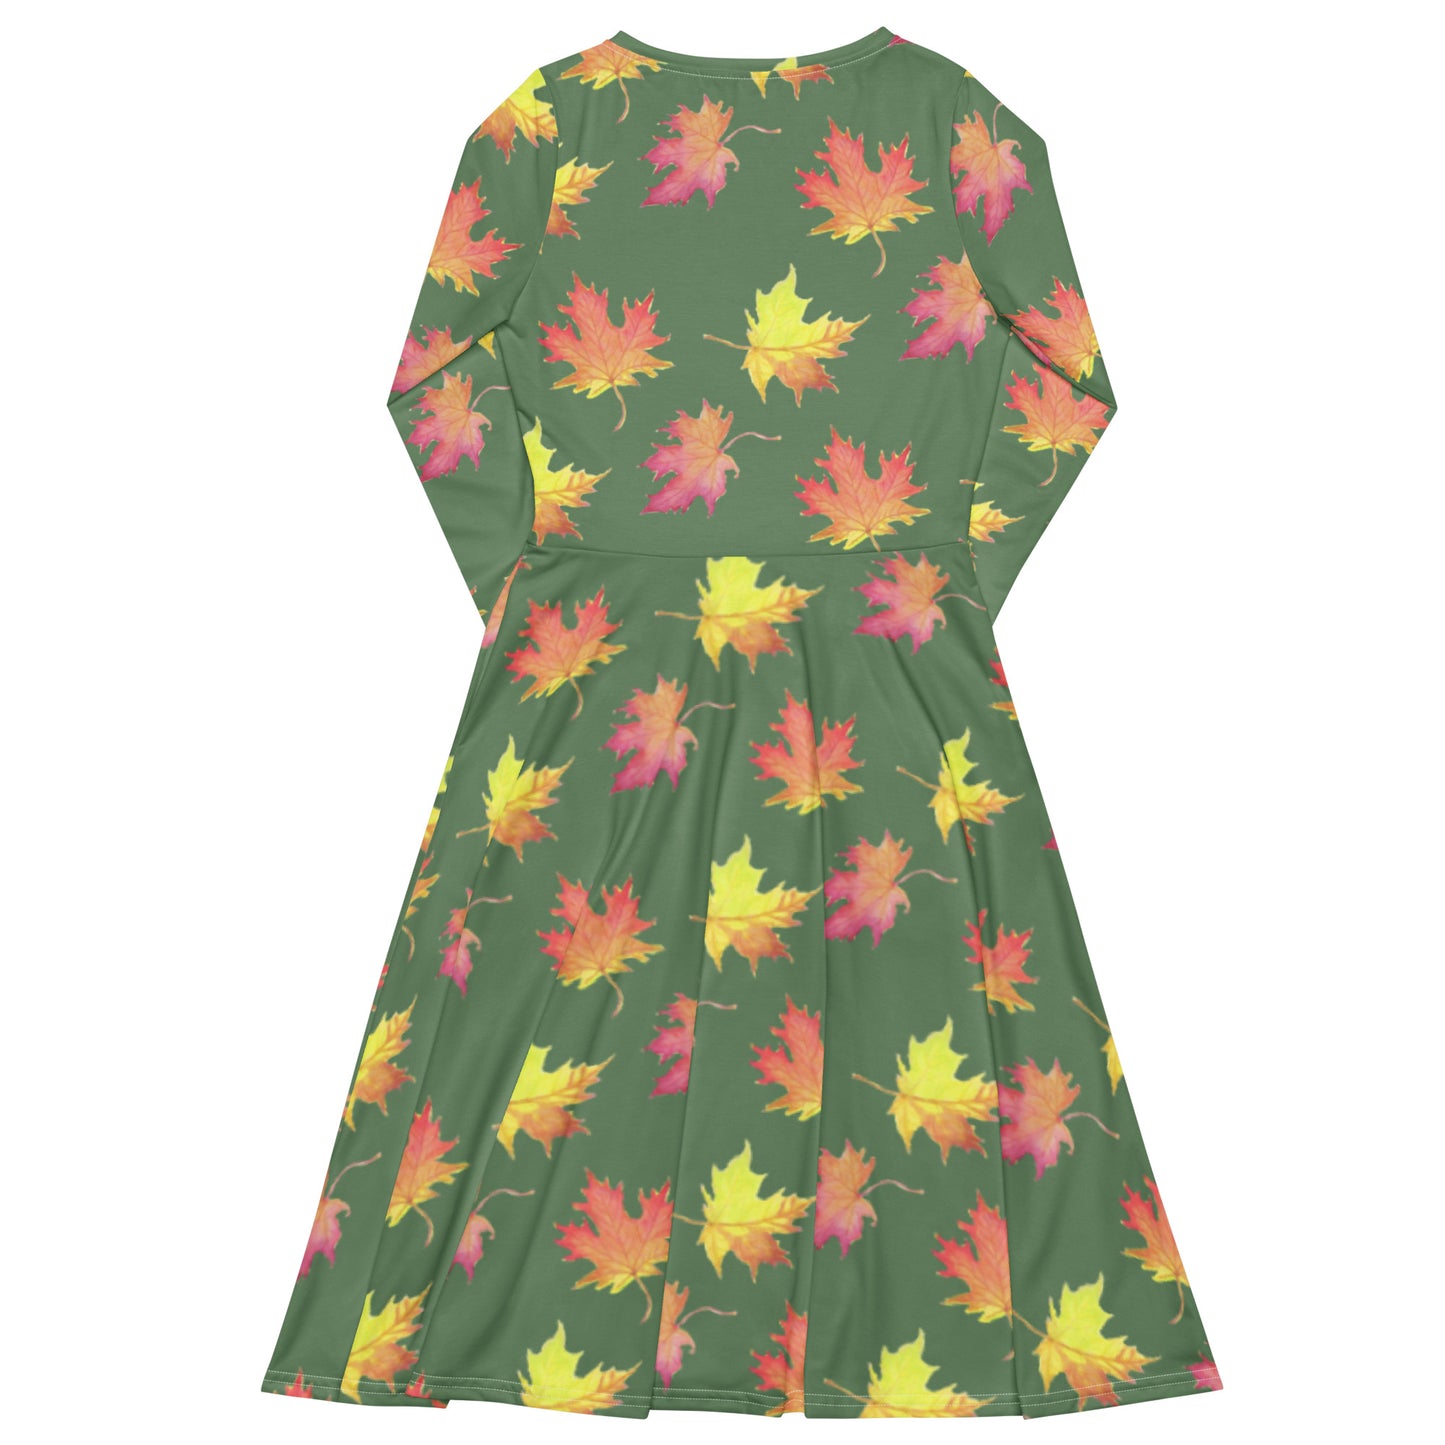 Long sleeve midi dress. Watercolor fall leaves patterned over an amulet green background. Soft and flattering fit. Boatline neck, fitted waist, flared bottom, and side pockets. Photo shows back of dress.